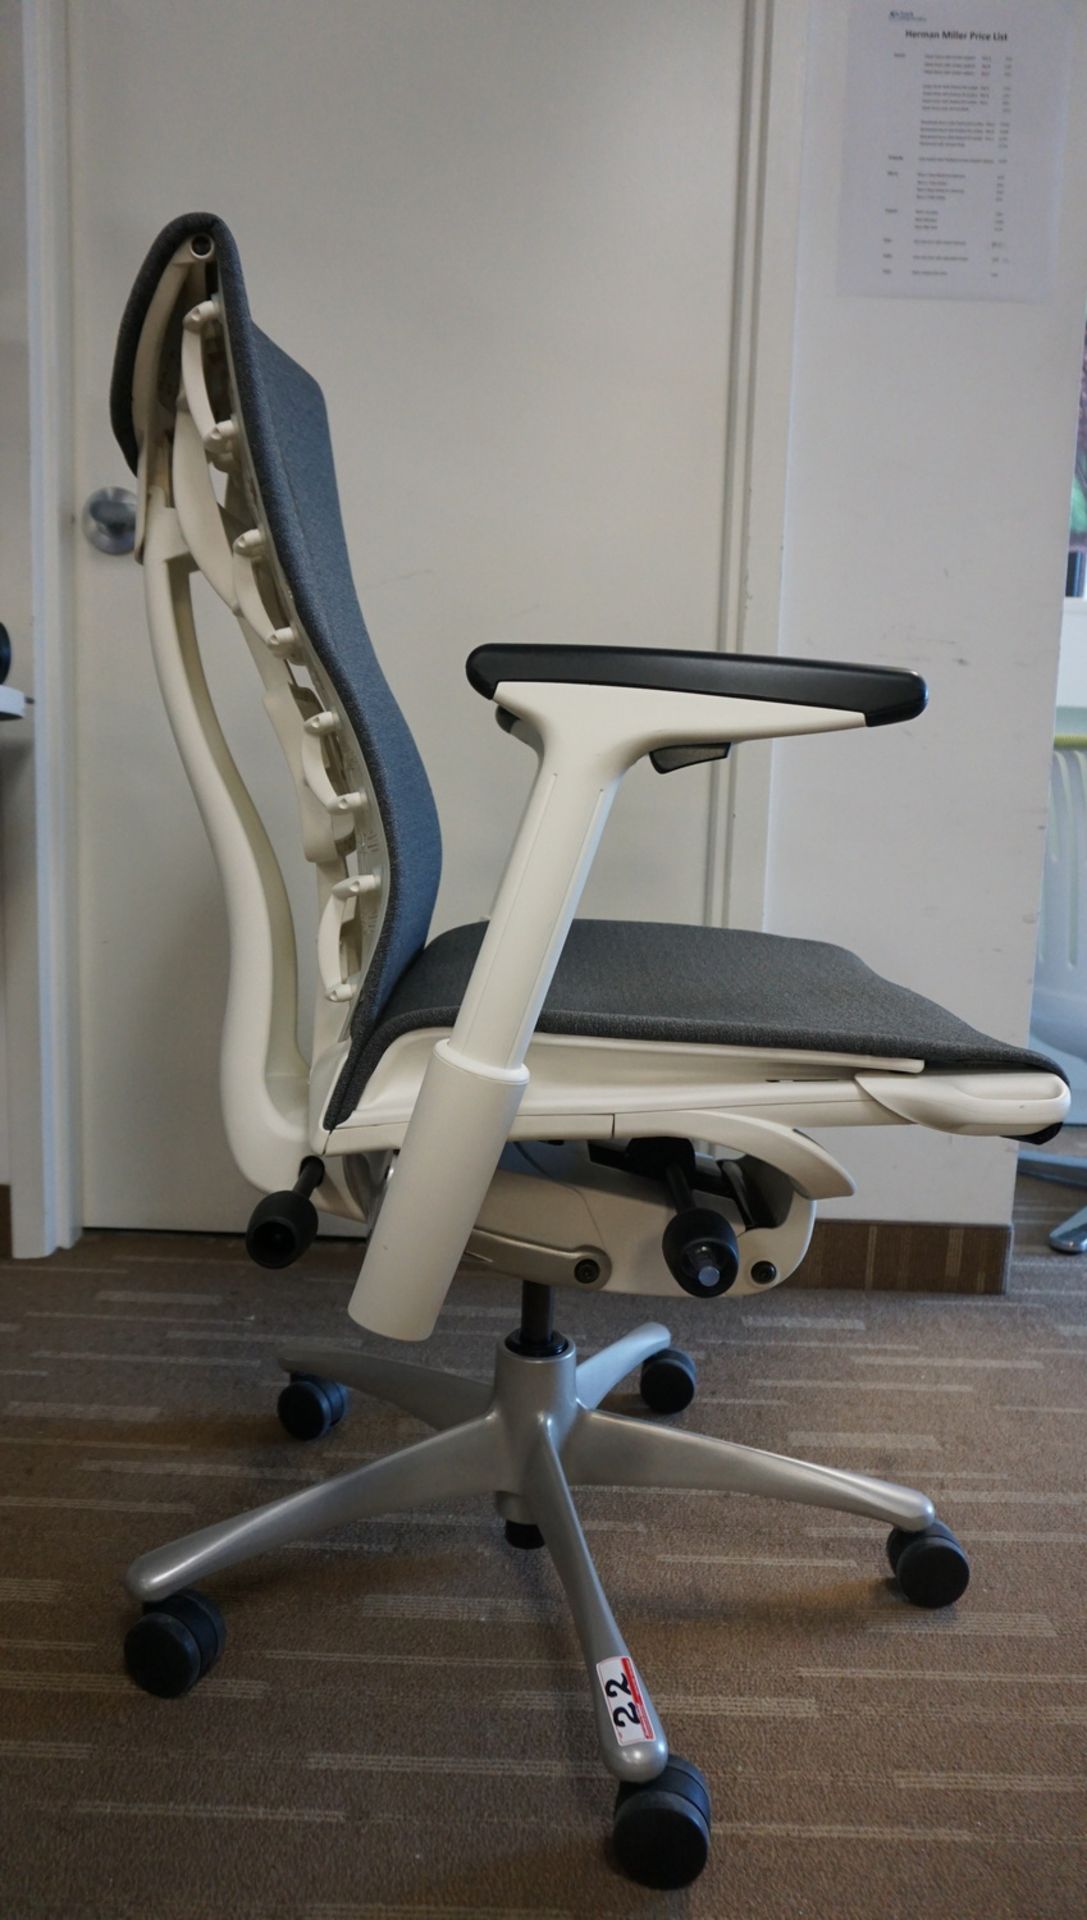 HERMAN MILLER EMBODY OFFICE CHAIR W/ WHITE FRAME, TITANIUM BASE, & GREY FABRIC ($2,700 MSRP) - Image 2 of 4